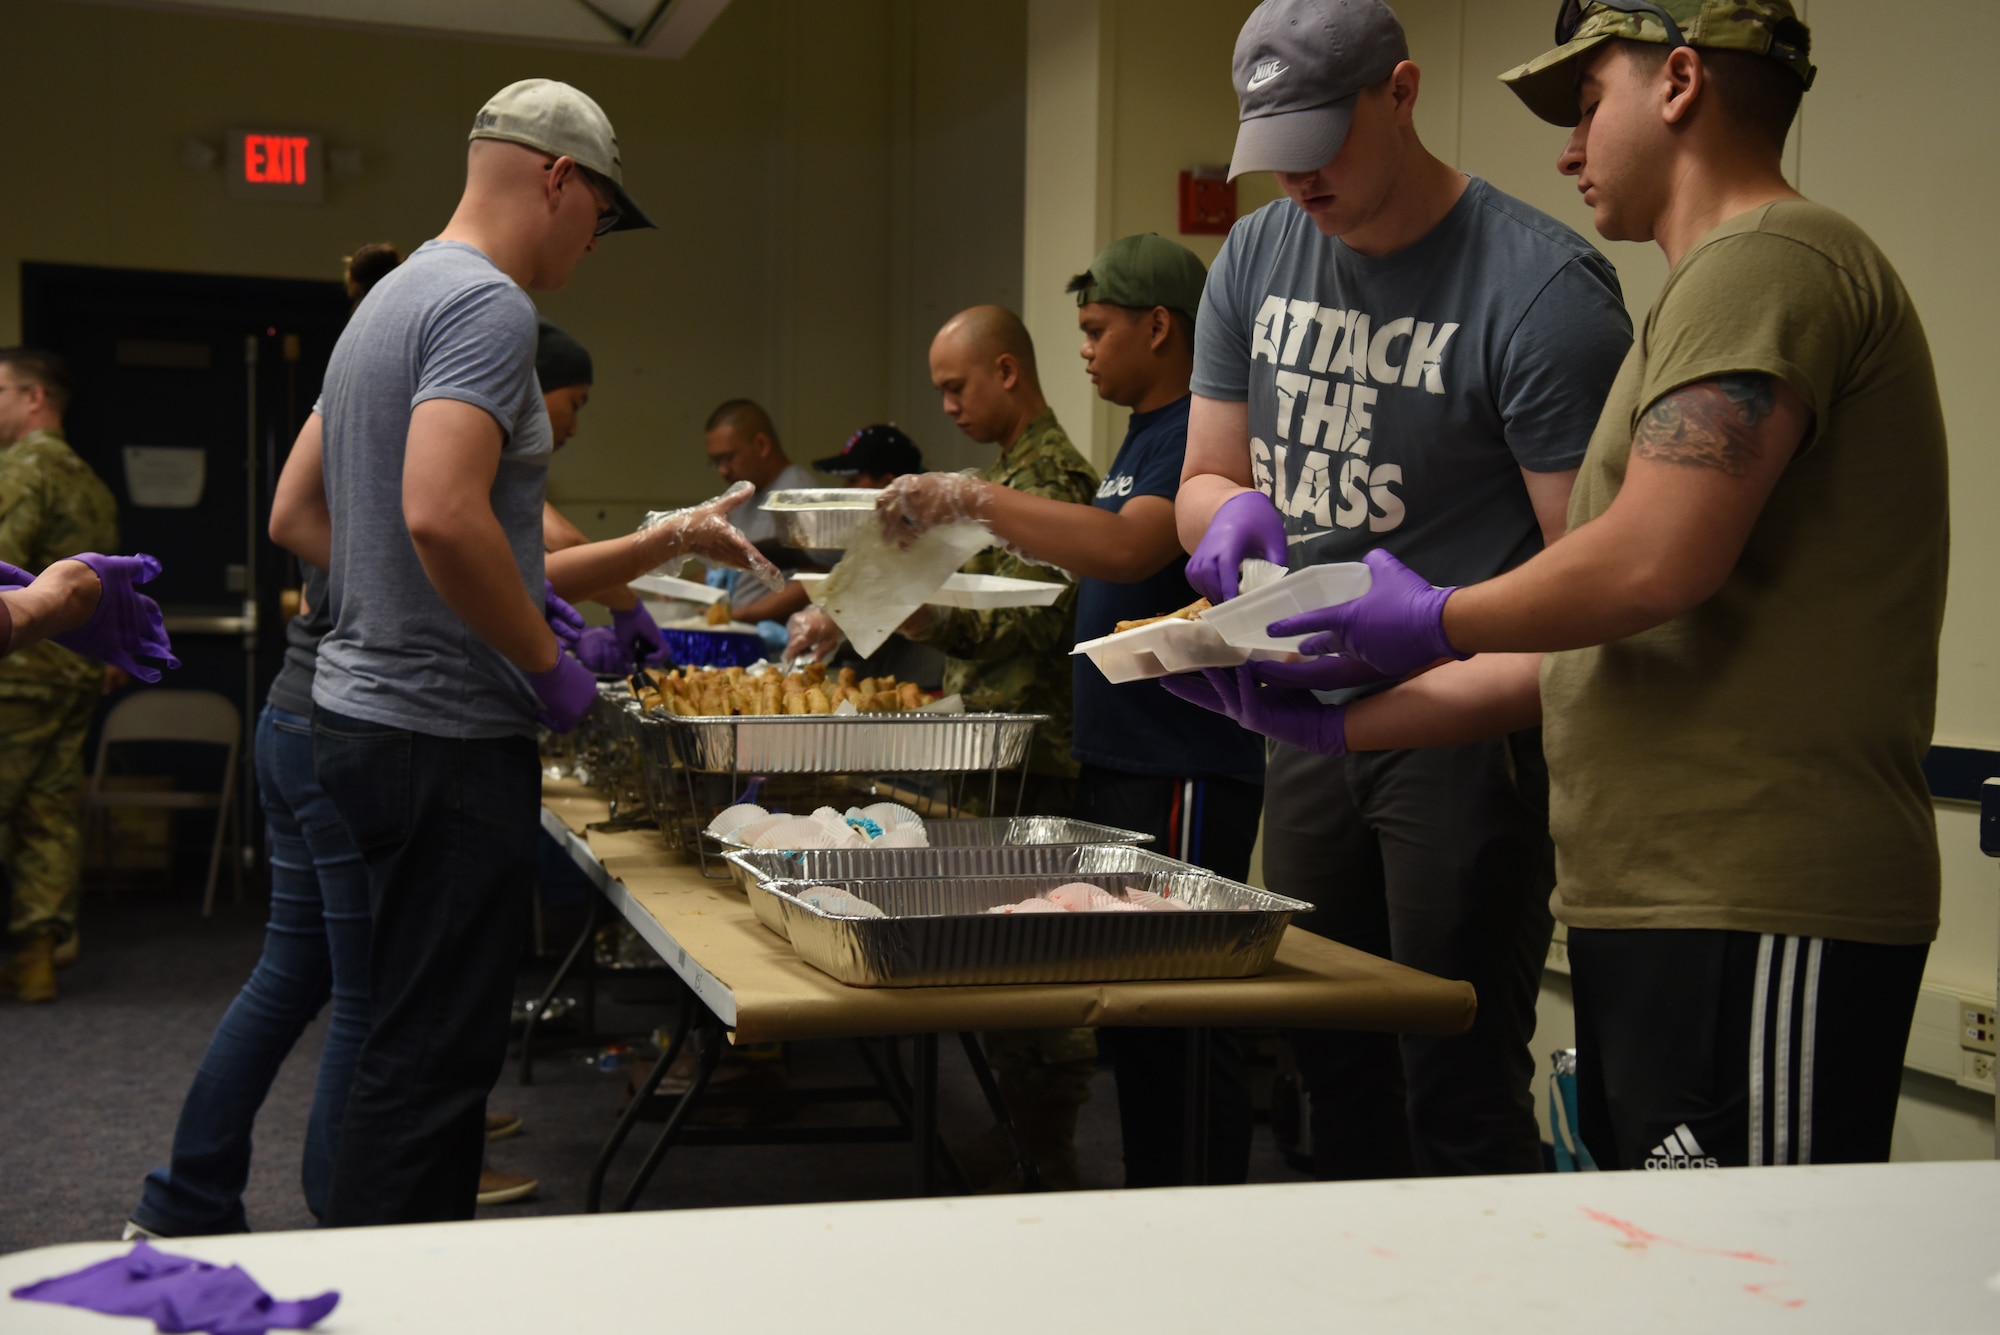 Volunteers serve food at the Asian-American Pacific Islander Heritage Cultural Show and Luncheon at Kirtland Air Force Base, N.M., May 22, 2019. Attendees were treated to a meal as well as cultural performances. (U.S. Air Force photo by Senior Airman Eli Chevalier)